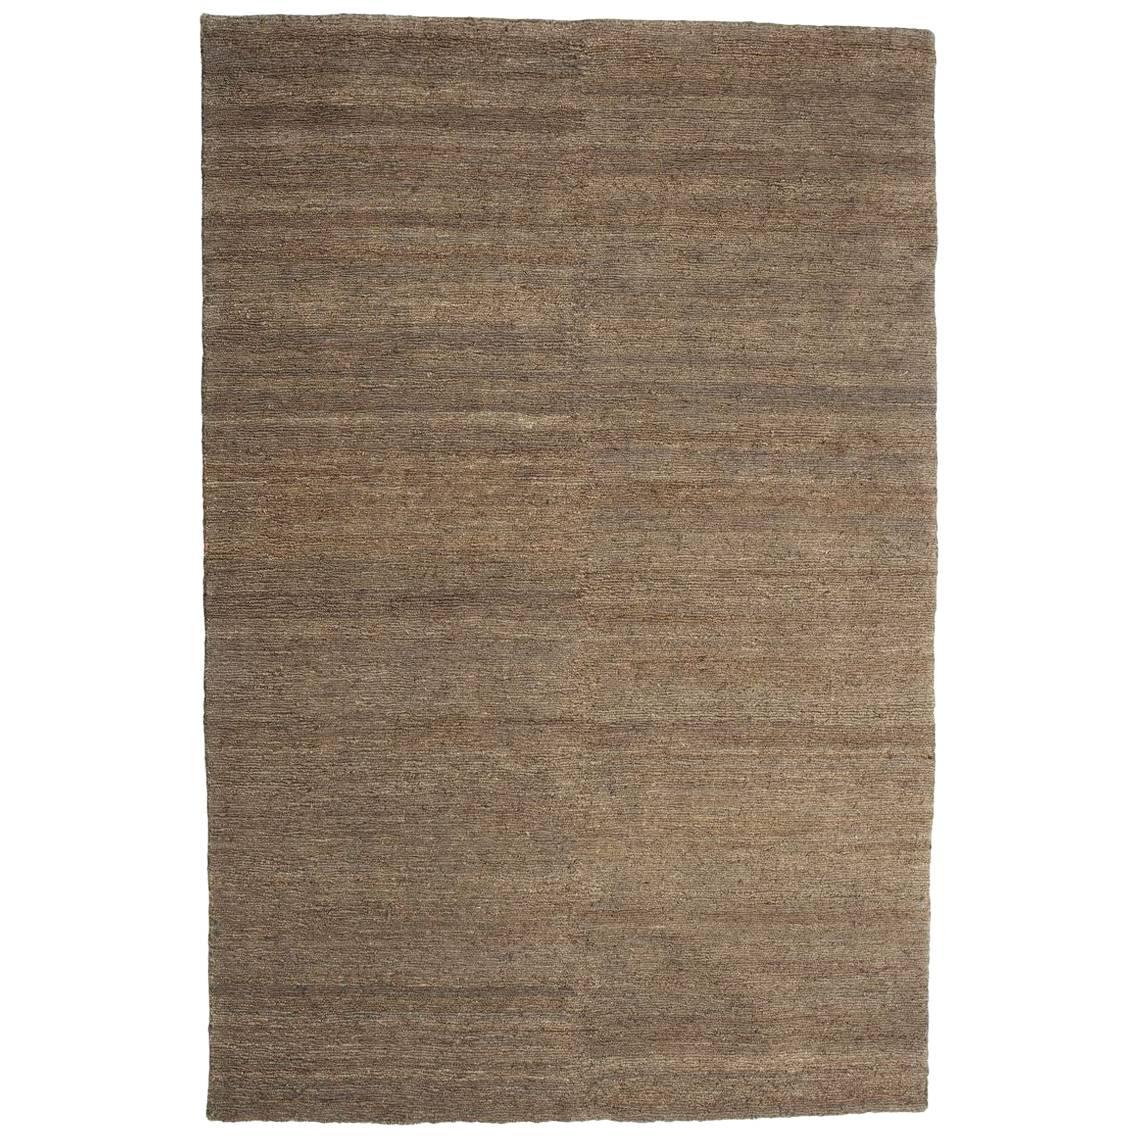 Khaki Earth Rug in Hand-Knotted Jute by Nani Marquina & Ariadna Miquel, Medium For Sale